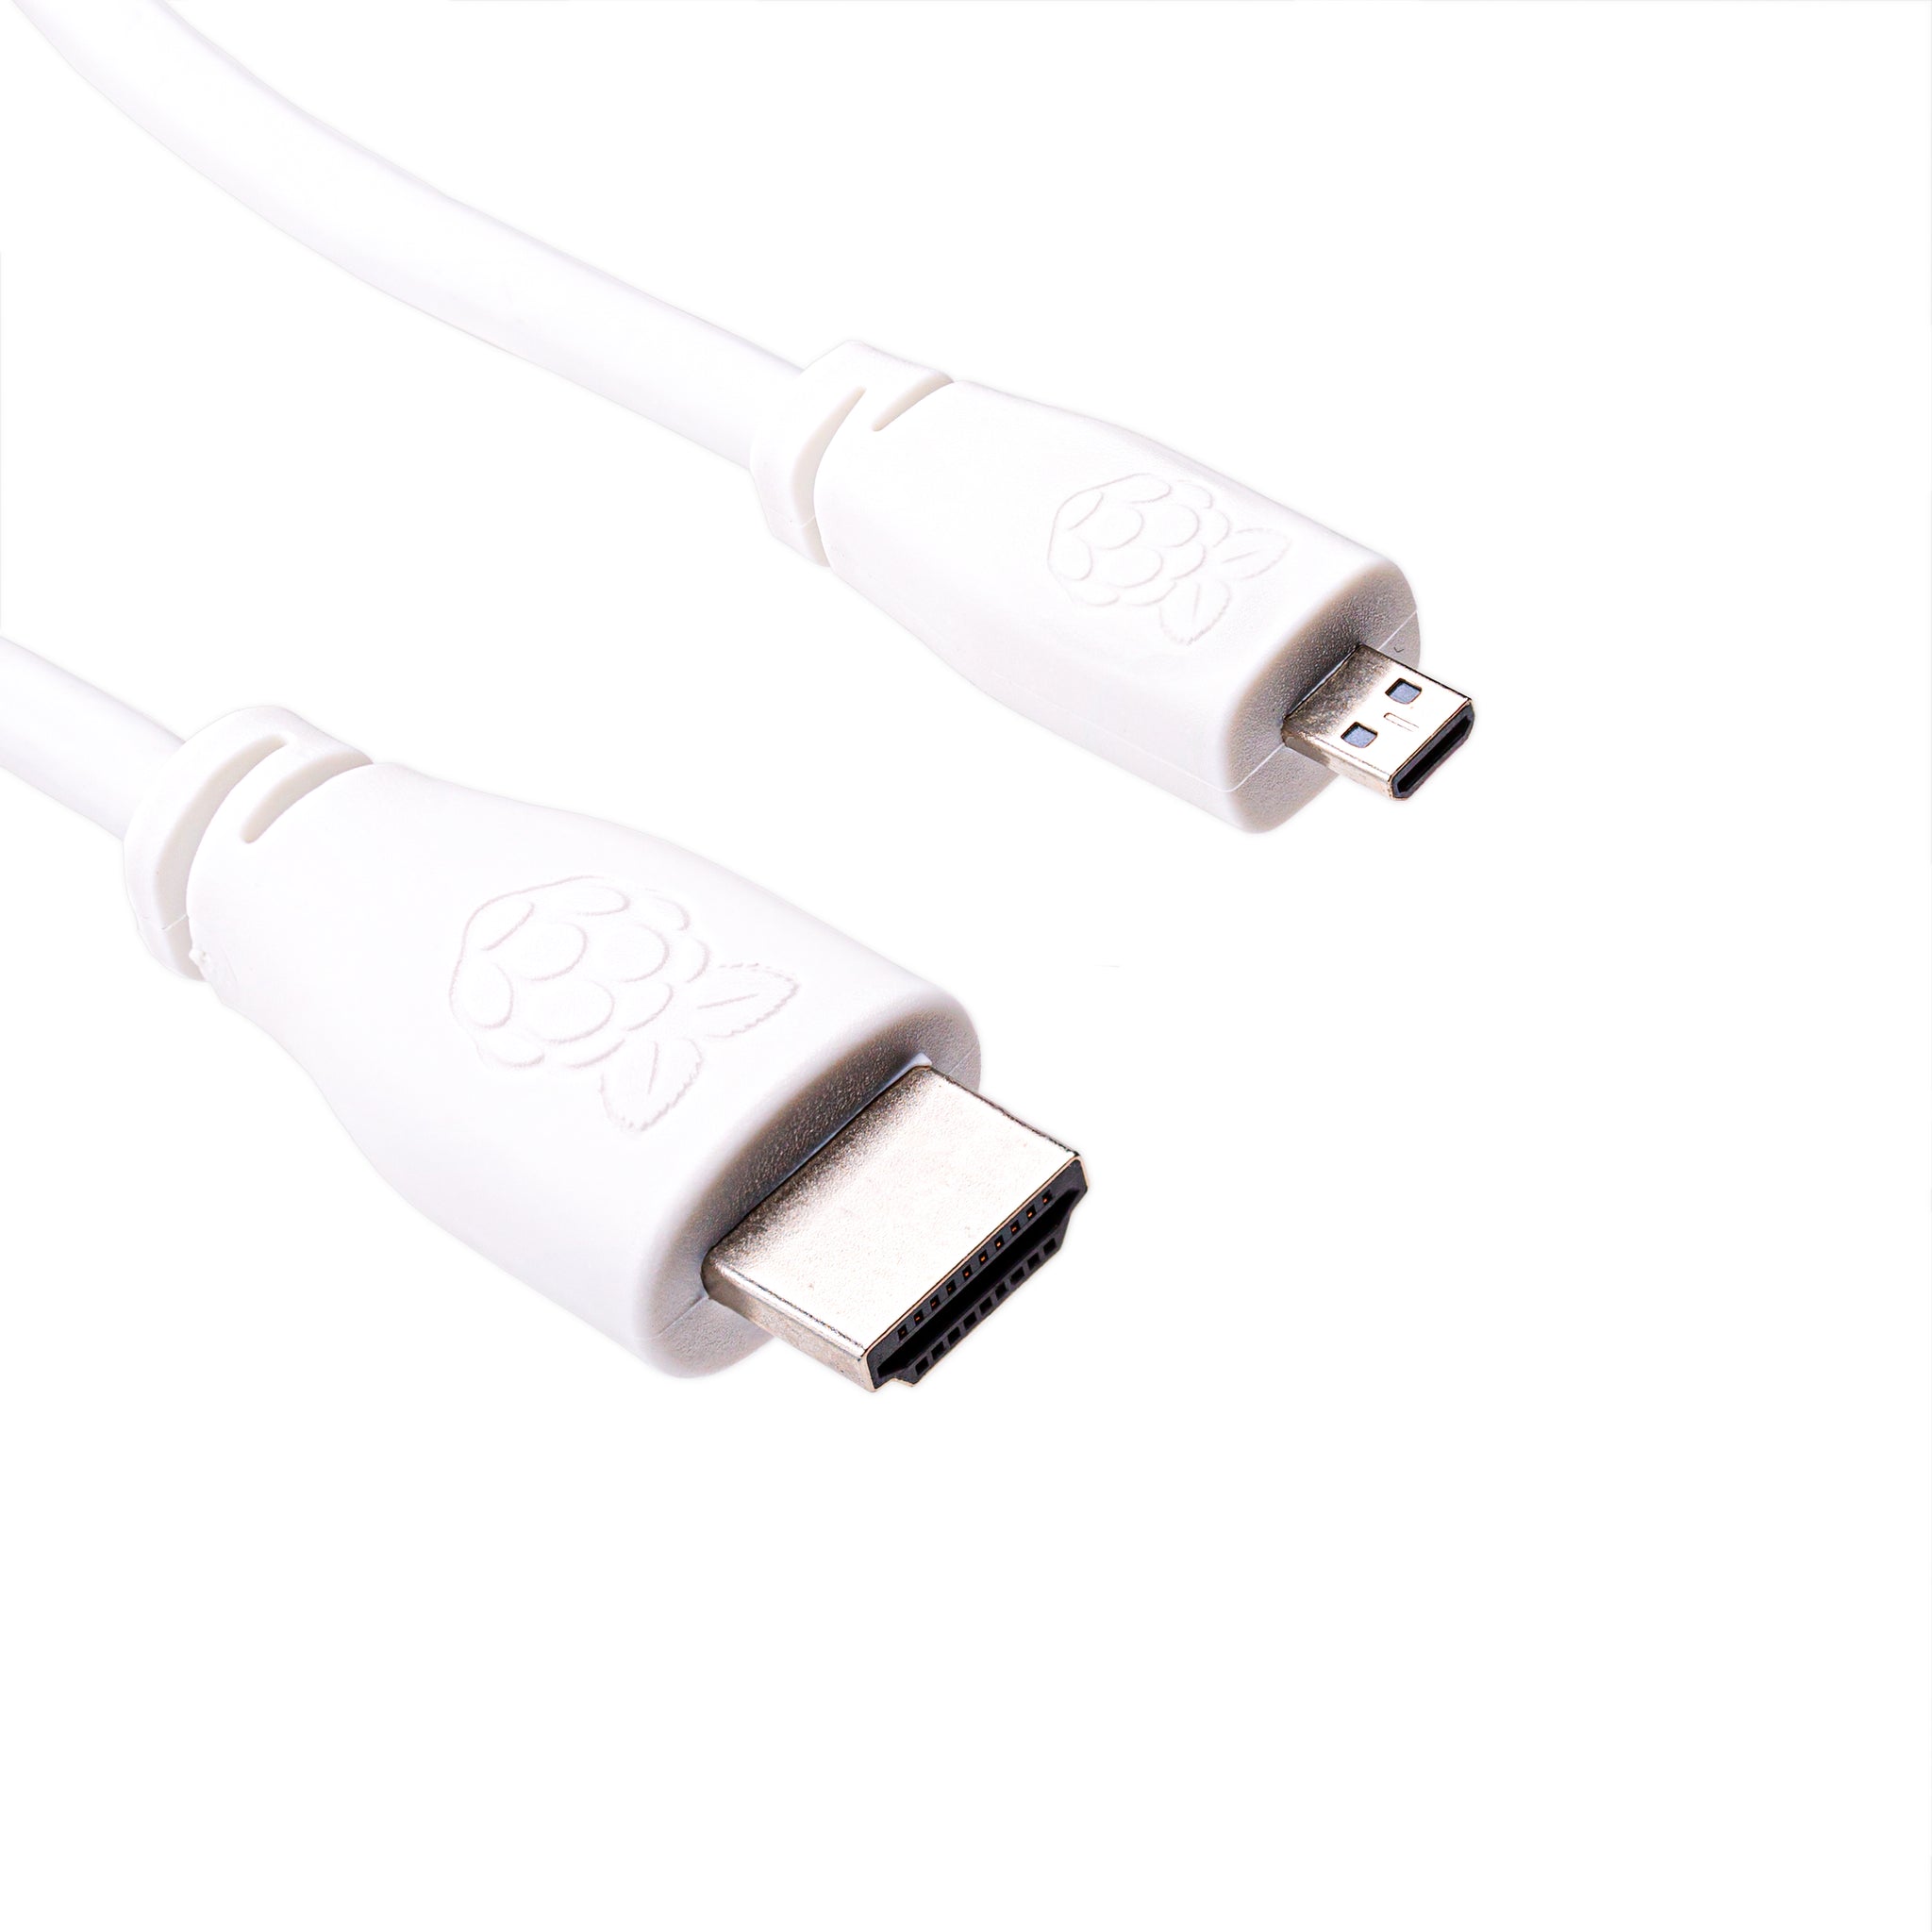 Raspberry Pi micro-HDMI to standard Cable, to 2 meter, White or